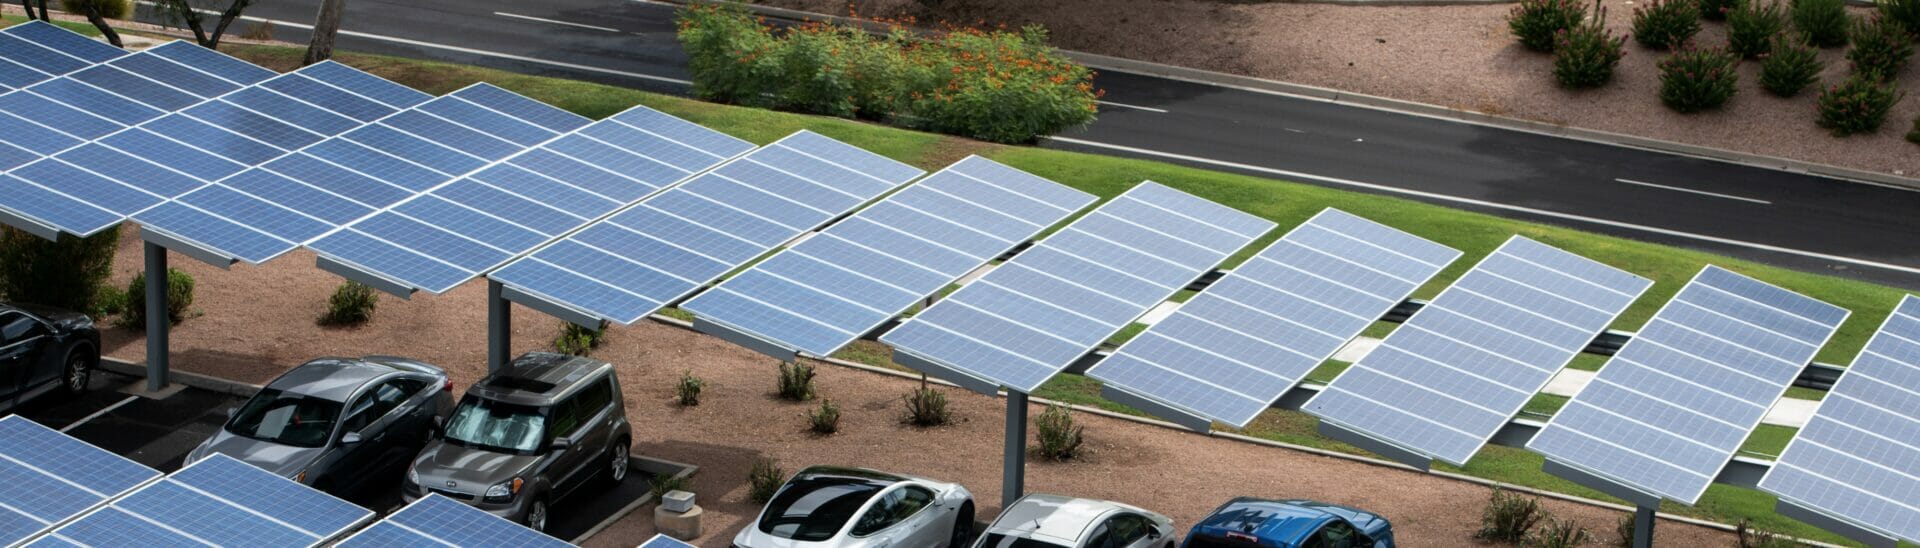 Aerial view o solar panels that provide shade for cars parked beneath them